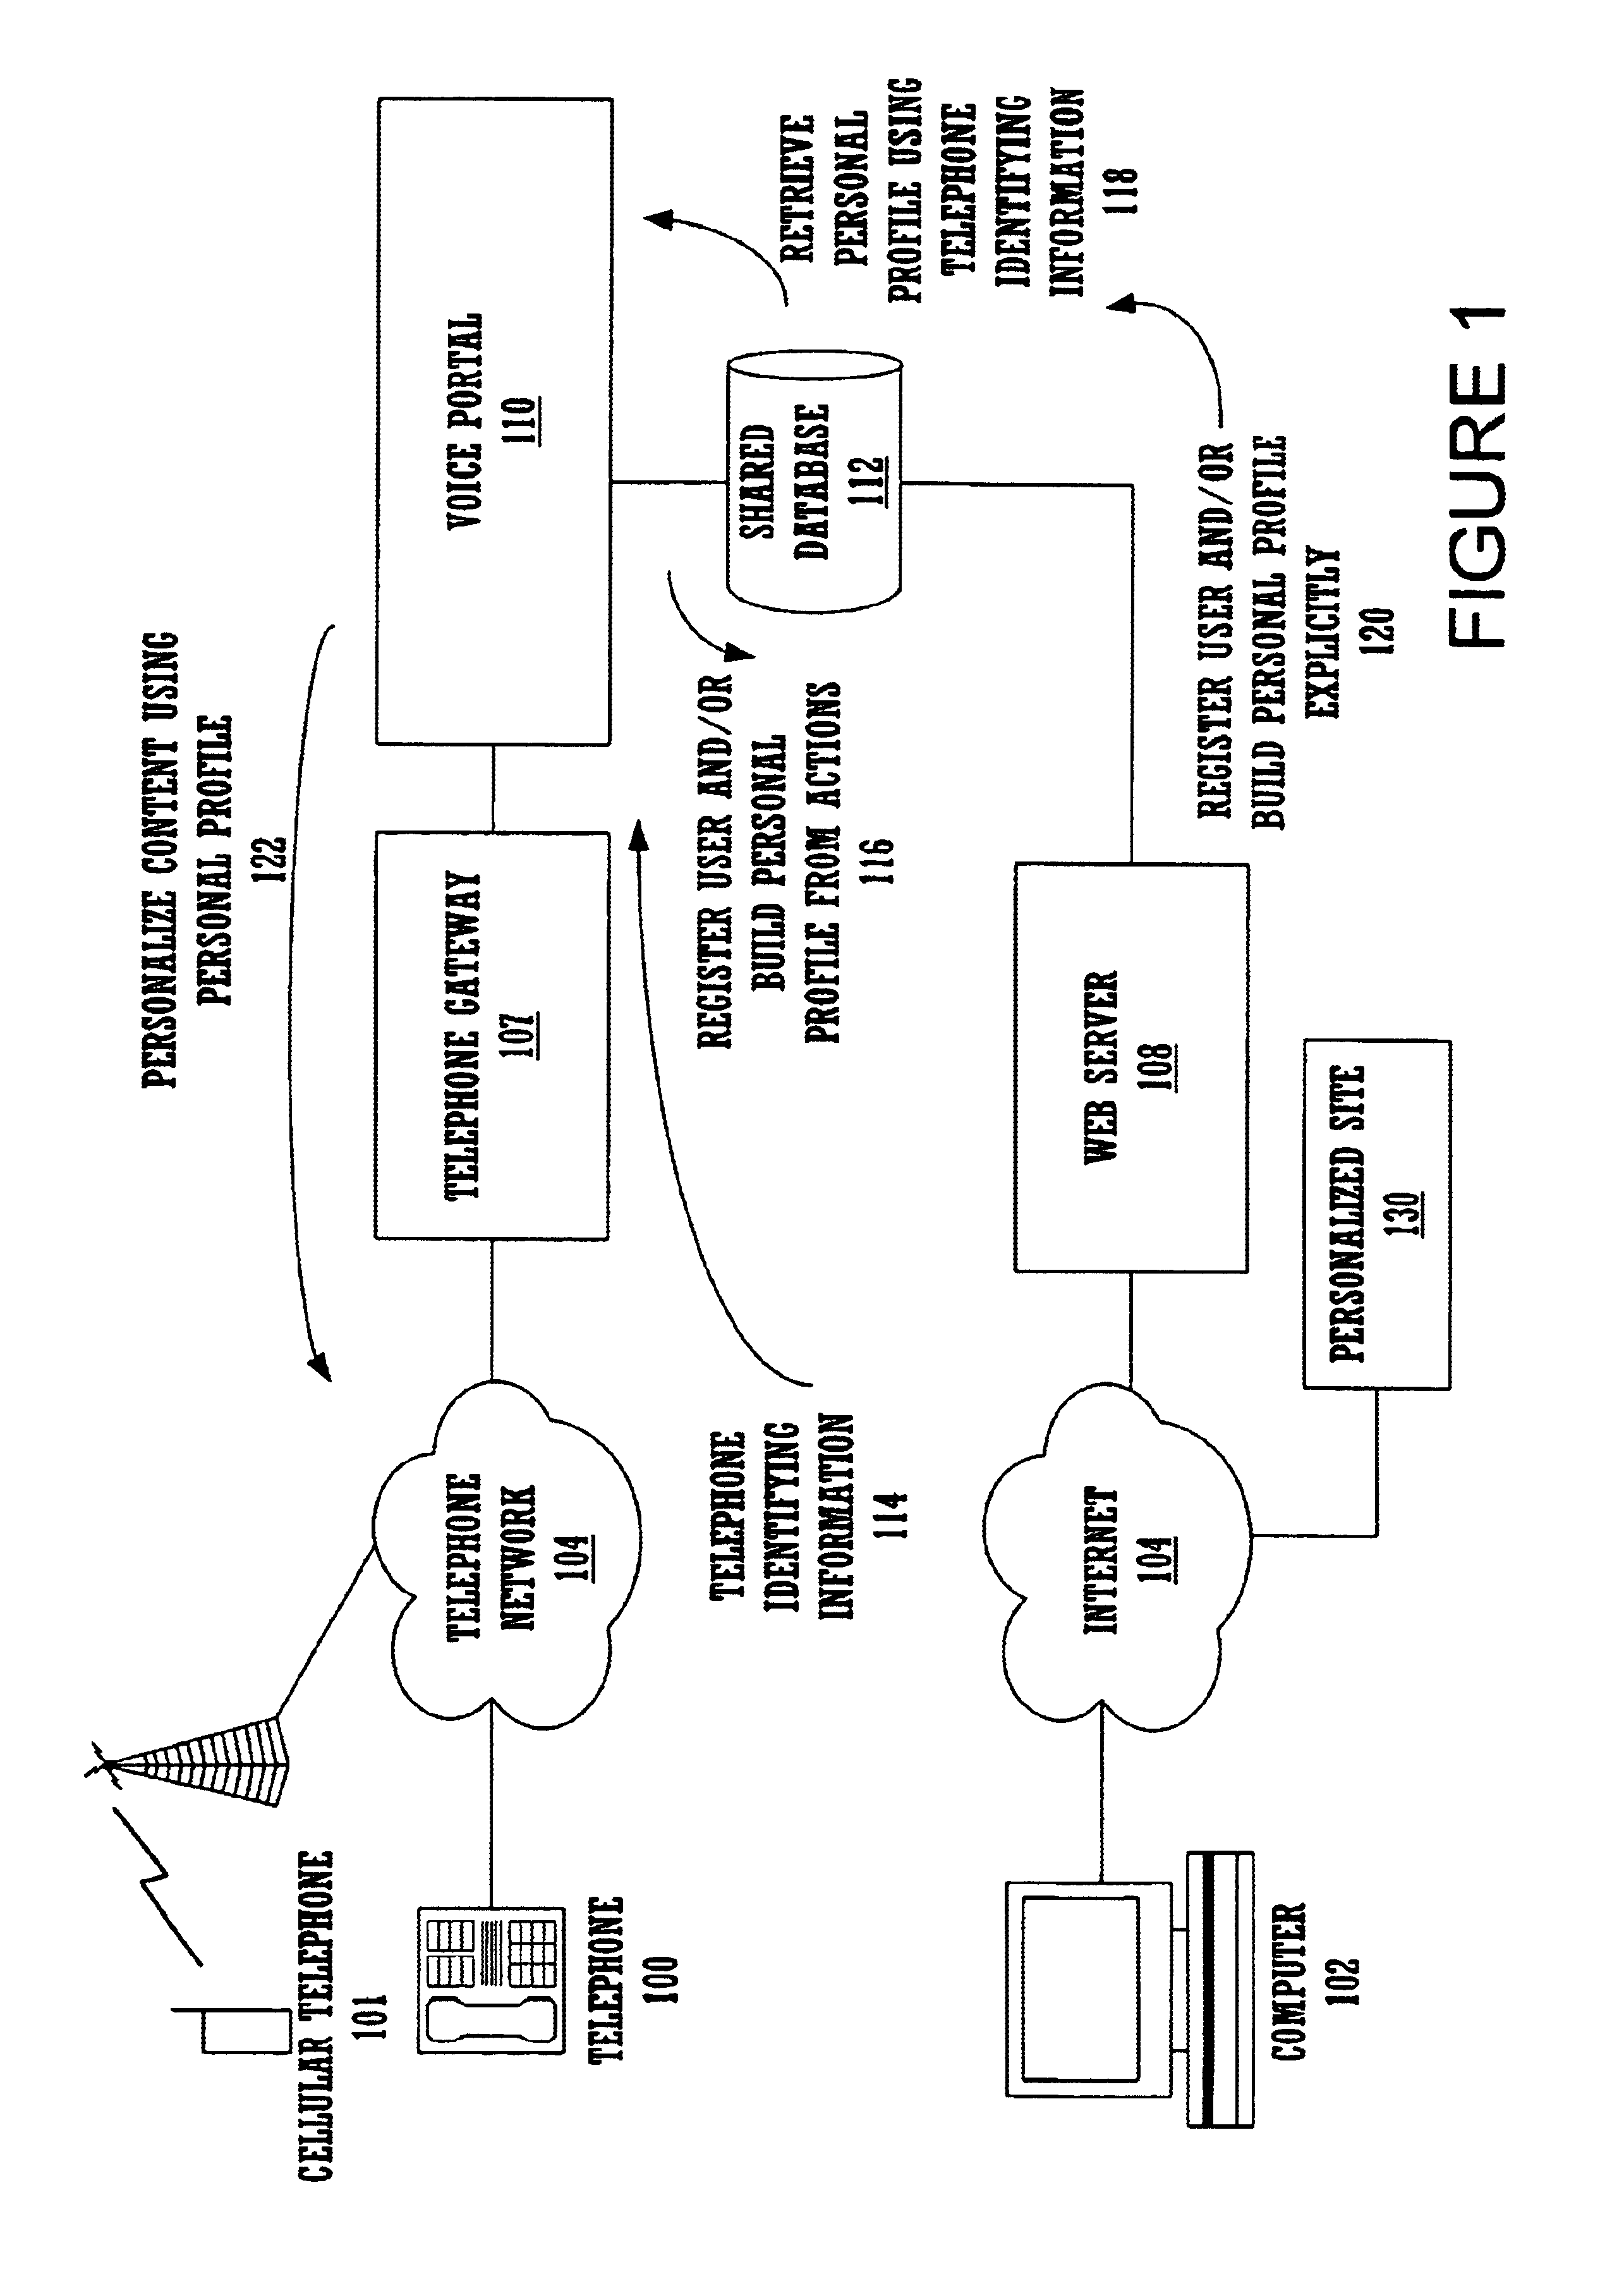 Method and apparatus for content personalization over a telephone interface with adaptive personalization